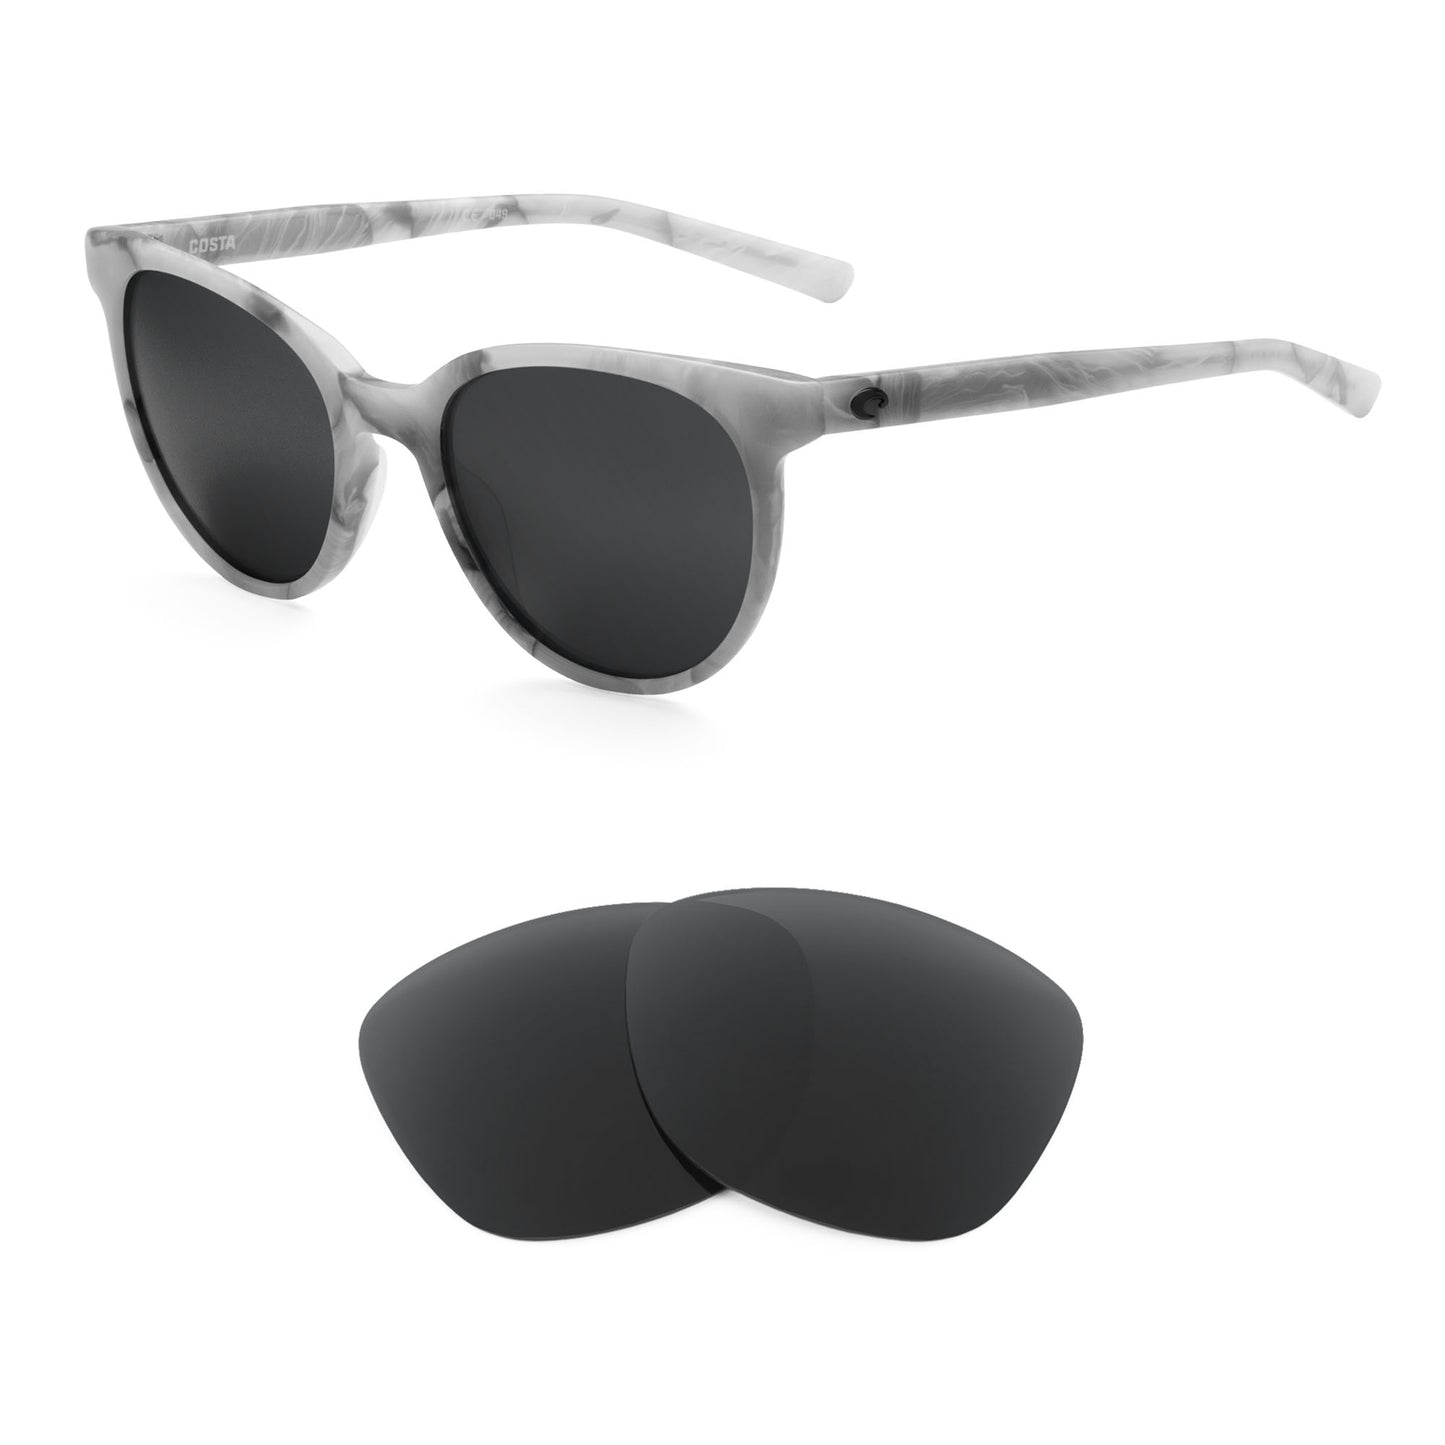 Costa Isla sunglasses with replacement lenses